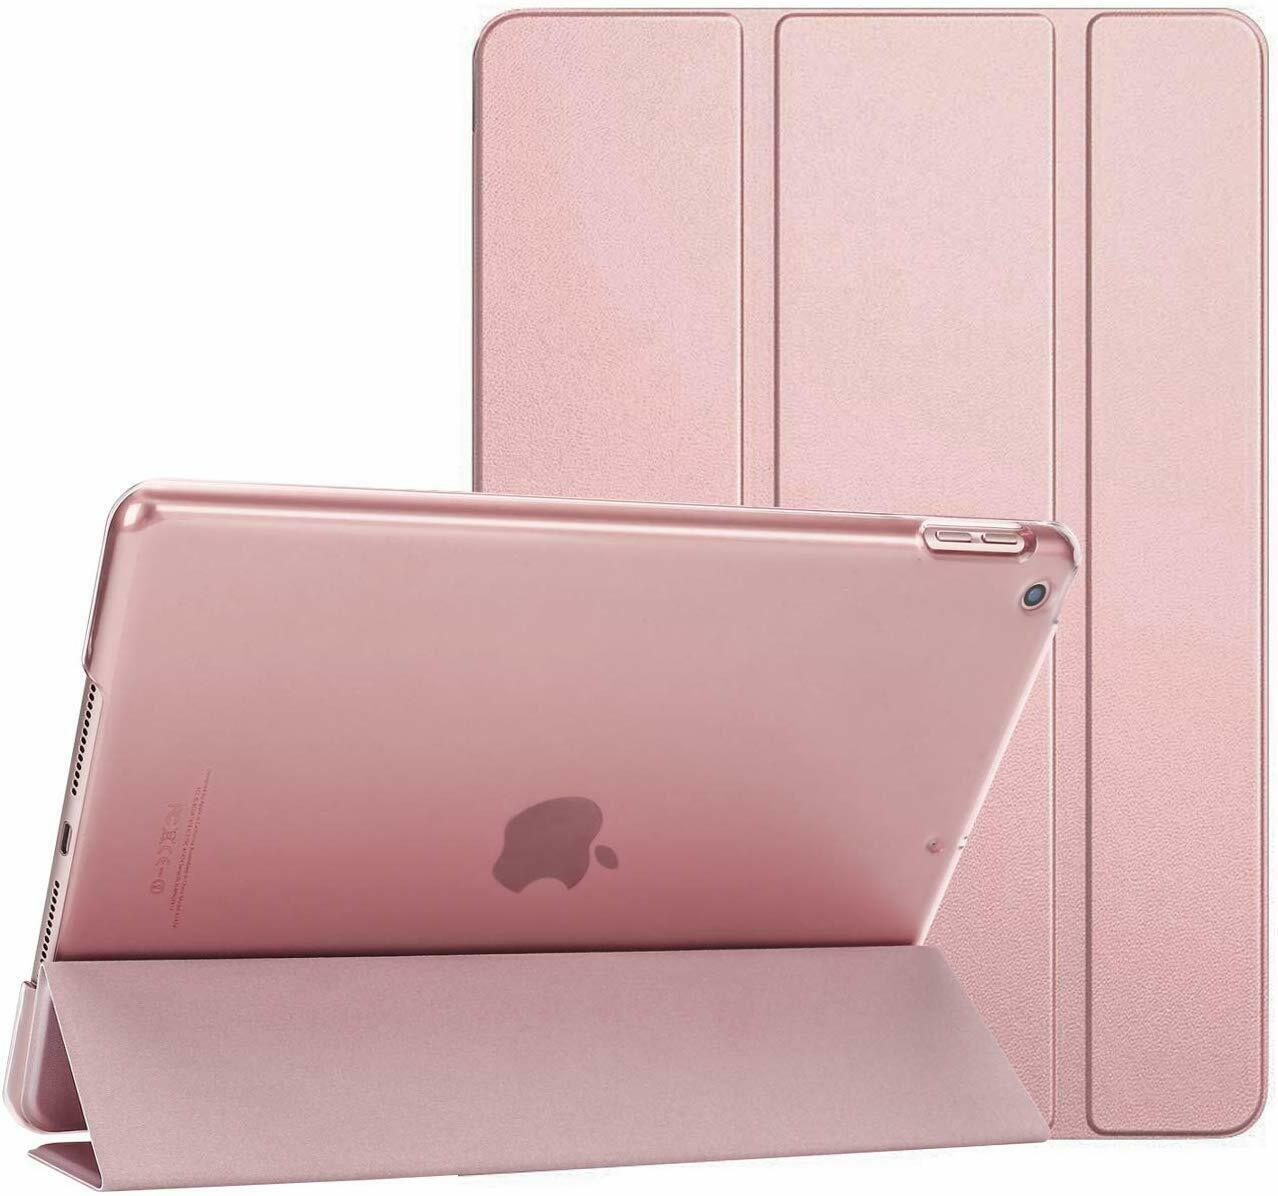 Protective Cover Case for Apple iPad 9th Gen 10.2 inches (Brand New)